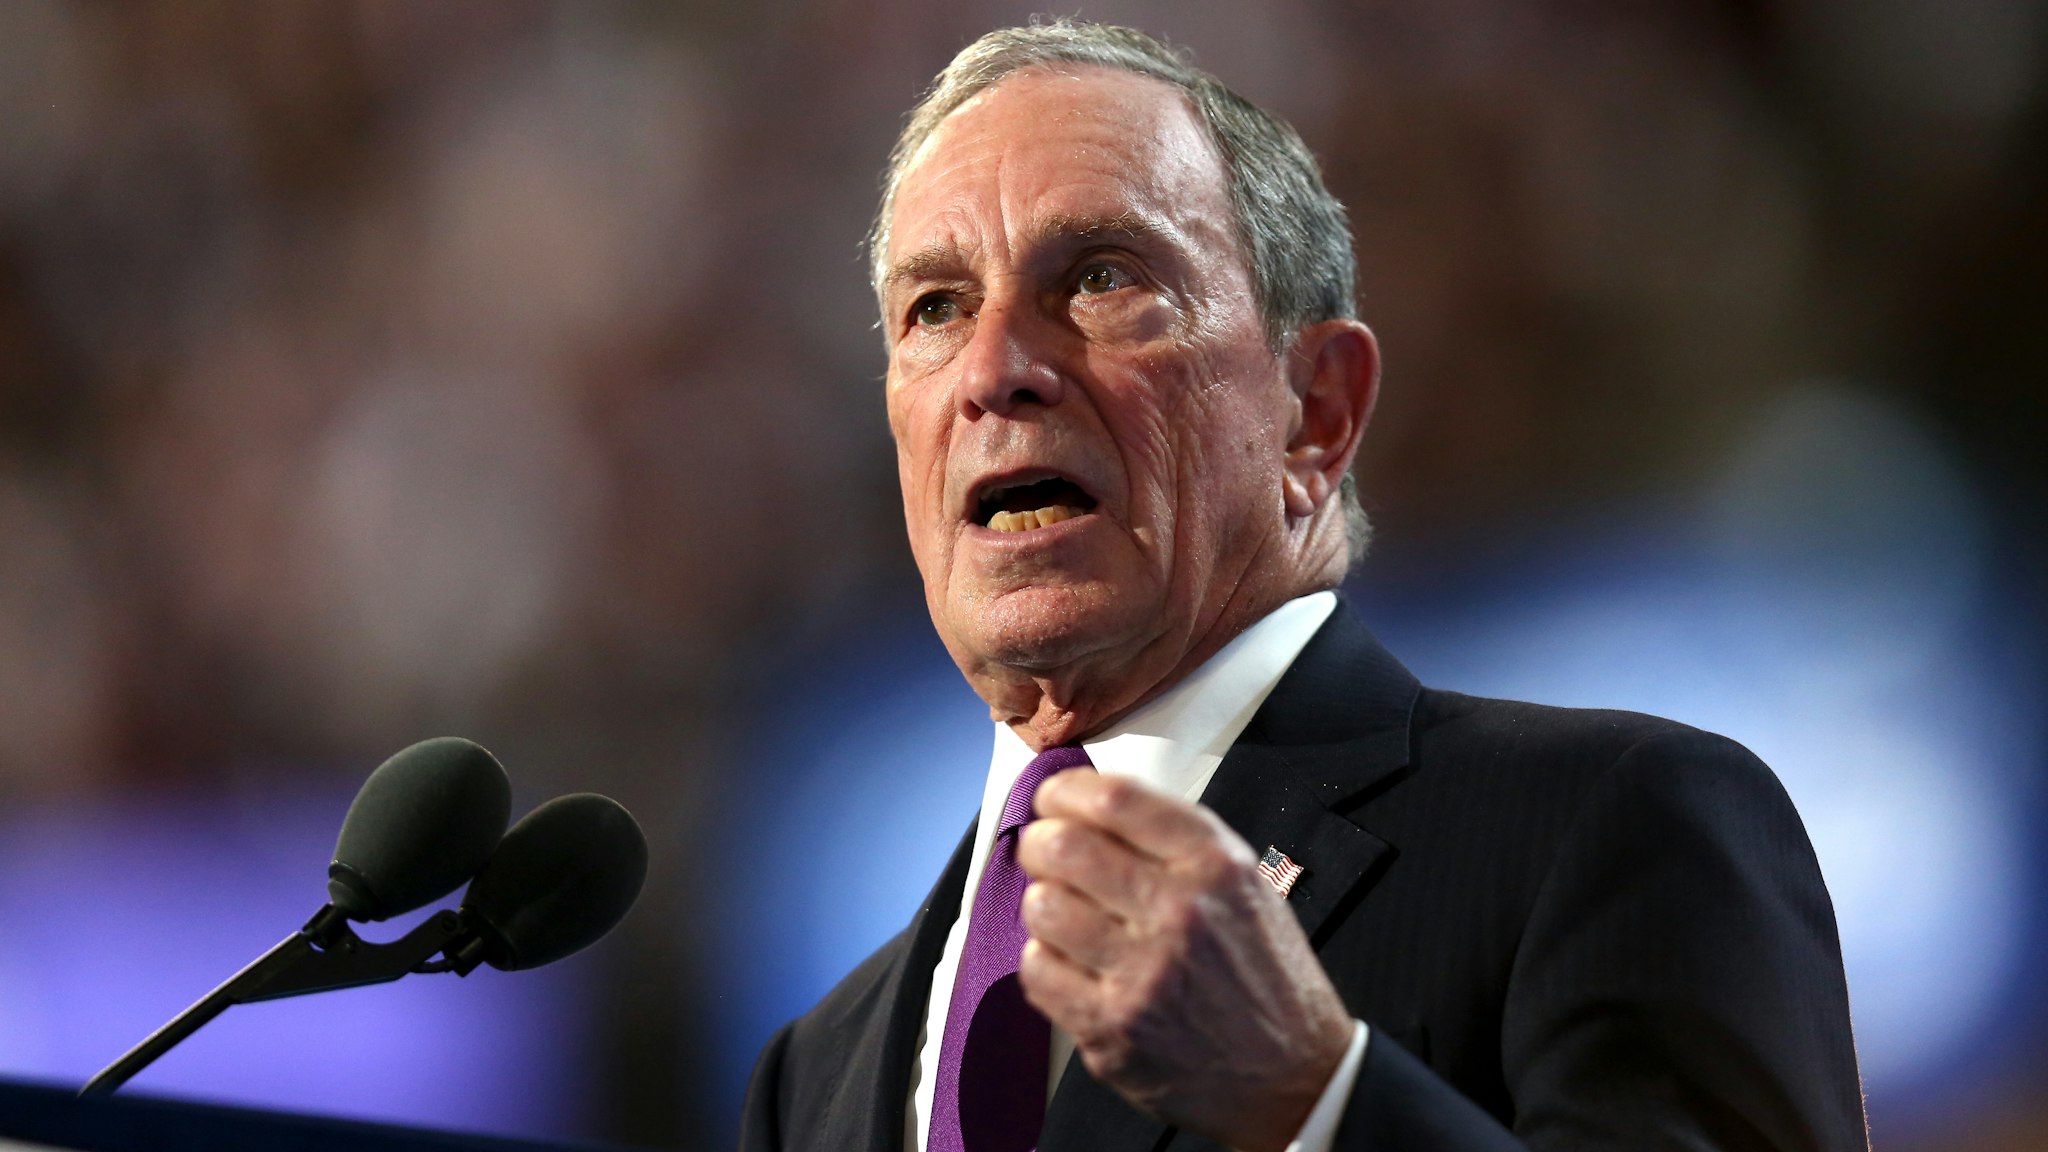 PHILADELPHIA, PA - JULY 27: Former New York City Mayor Michael Bloomberg delivers remarks on the third day of the Democratic National Convention at the Wells Fargo Center, July 27, 2016 in Philadelphia, Pennsylvania. Democratic presidential candidate Hillary Clinton received the number of votes needed to secure the party's nomination. An estimated 50,000 people are expected in Philadelphia, including hundreds of protesters and members of the media. The four-day Democratic National Convention kicked off July 25.